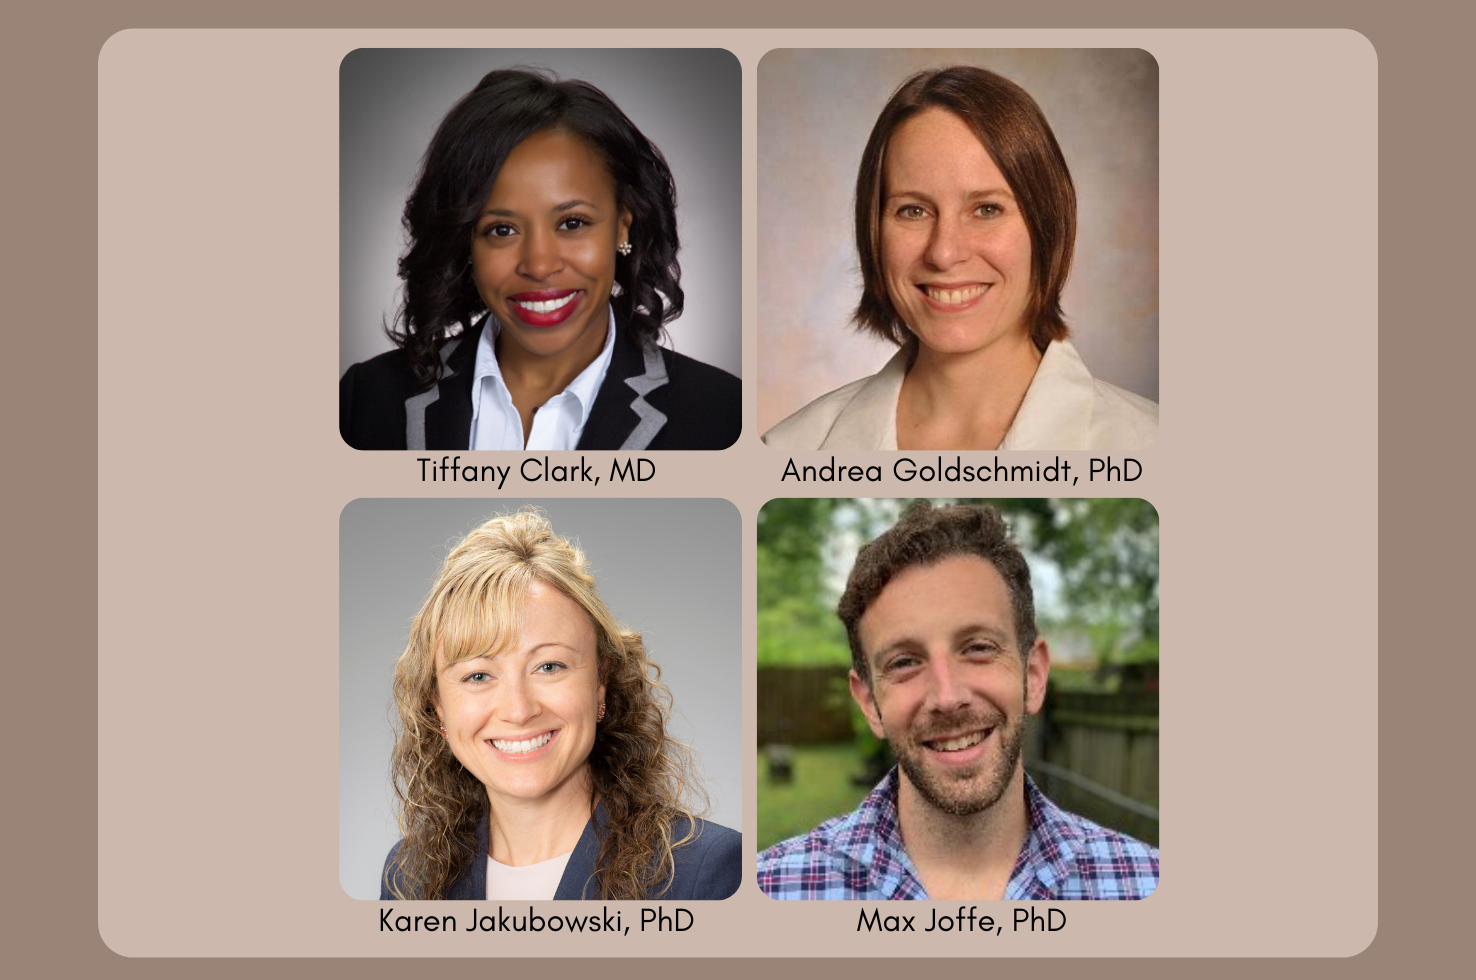 Pitt Psychiatry Welcomes New Faculty